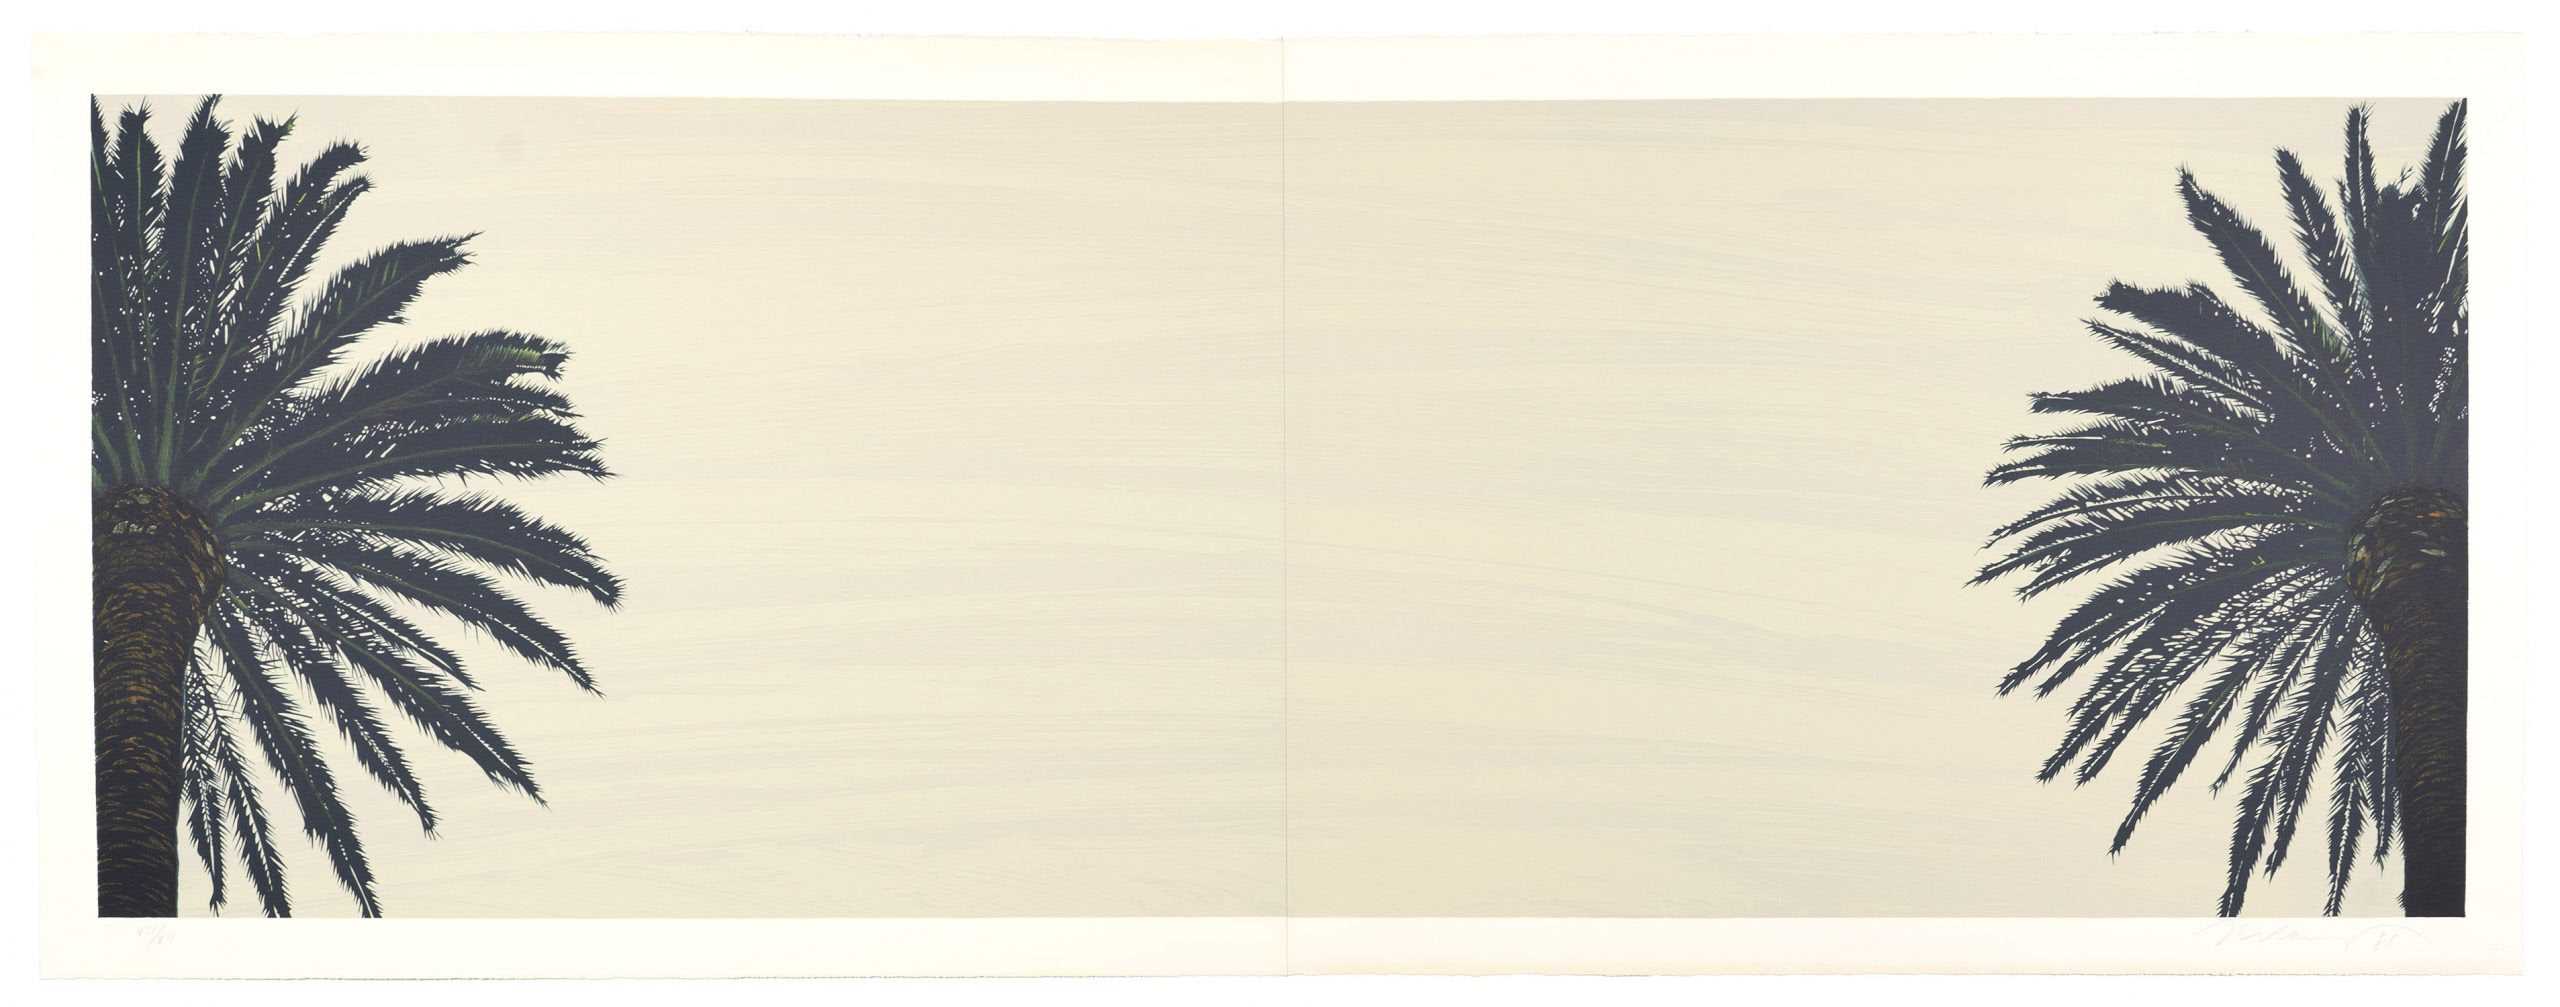 Mel Ramos Tenerife: Ode to Moe (Roman numeral edition), 1981. Five-color lithograph on Rolled white Arches, 22 x 58 inches. Edition of 7. Collaborating Printer(s): Catherine Kuhn.